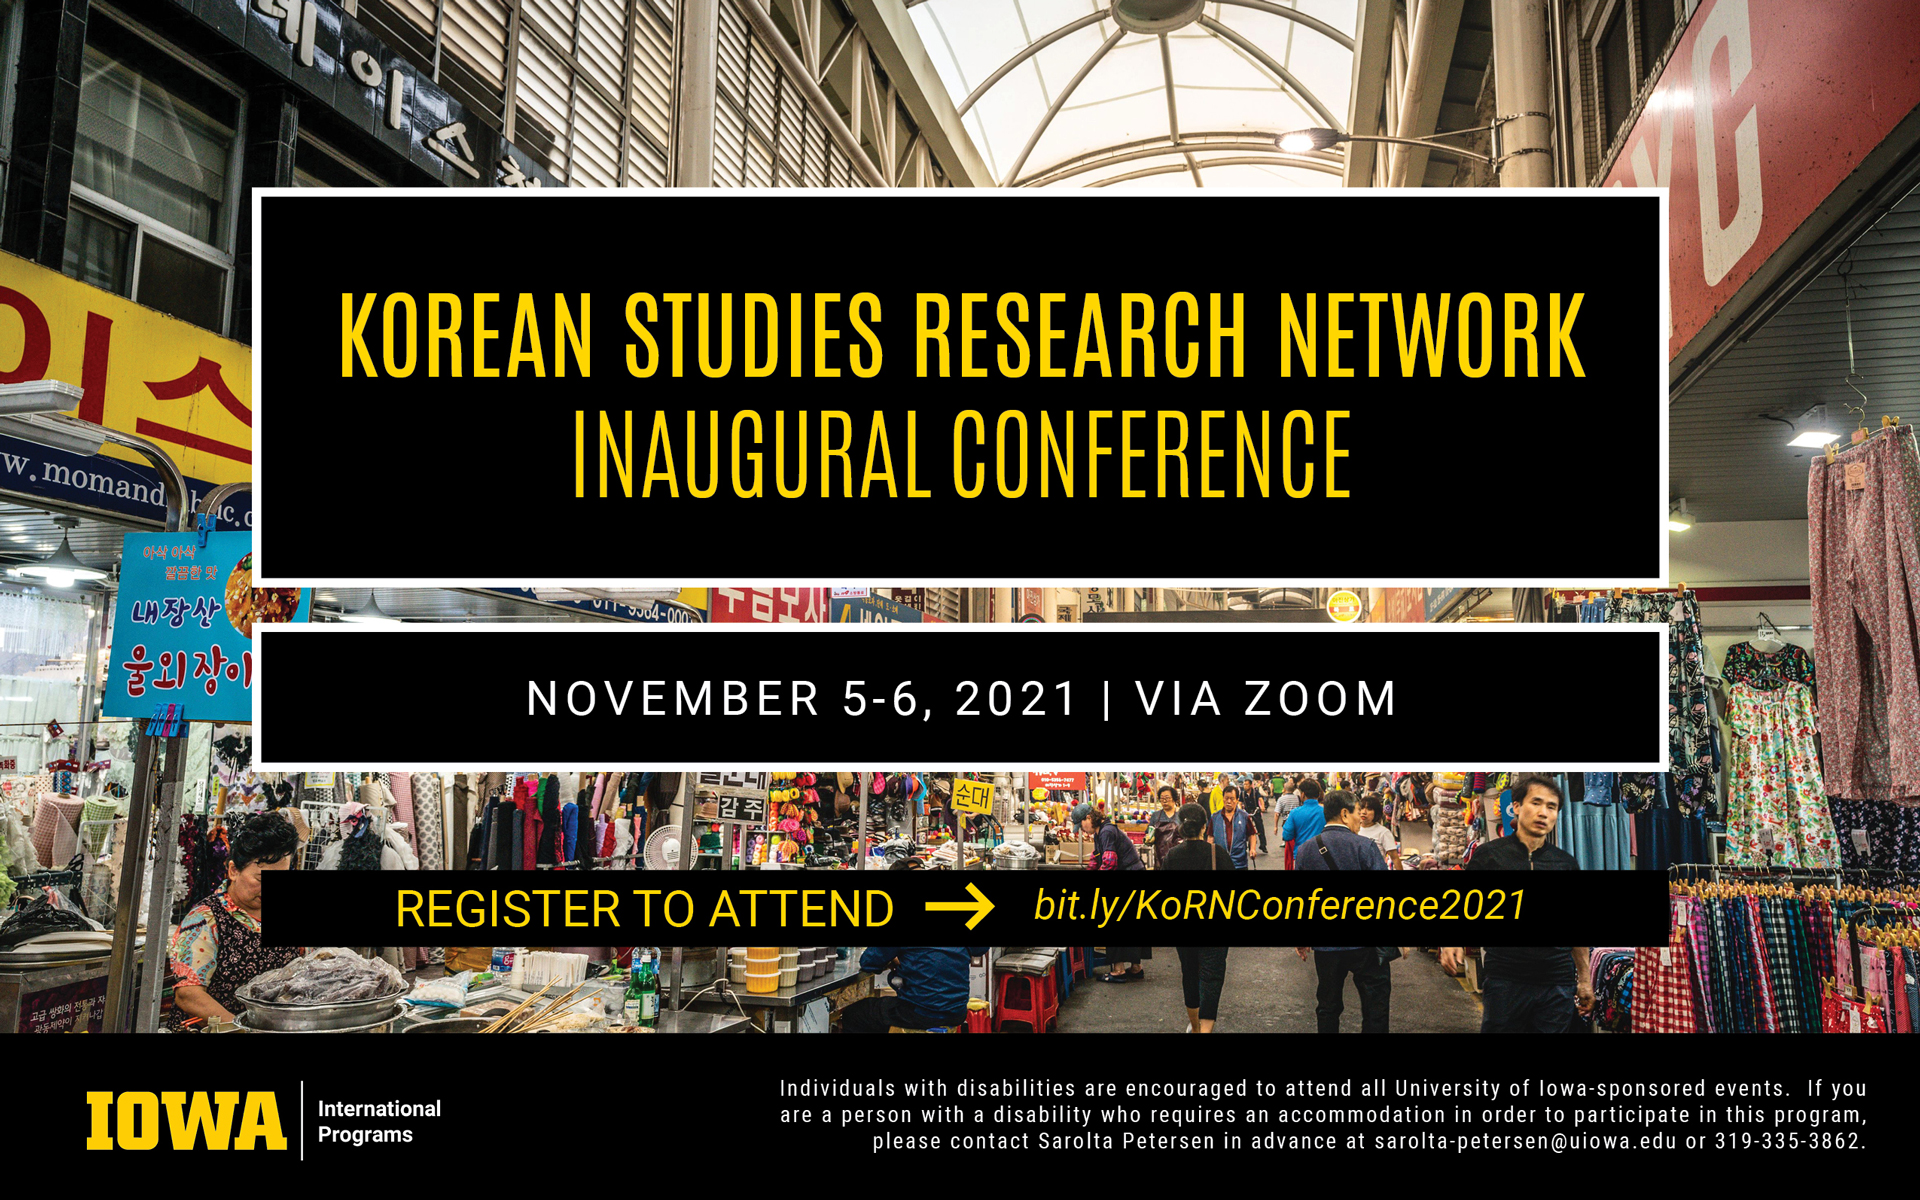 Korean Studies Research network inaugural conference. November 5 through 6 2021 happening via Zoom. Register to attend at bit.ly/KoRNConference2021  For disability accommodations please contact Sarolta Petersen in advance at sarolta-petersen@uiowa.edu